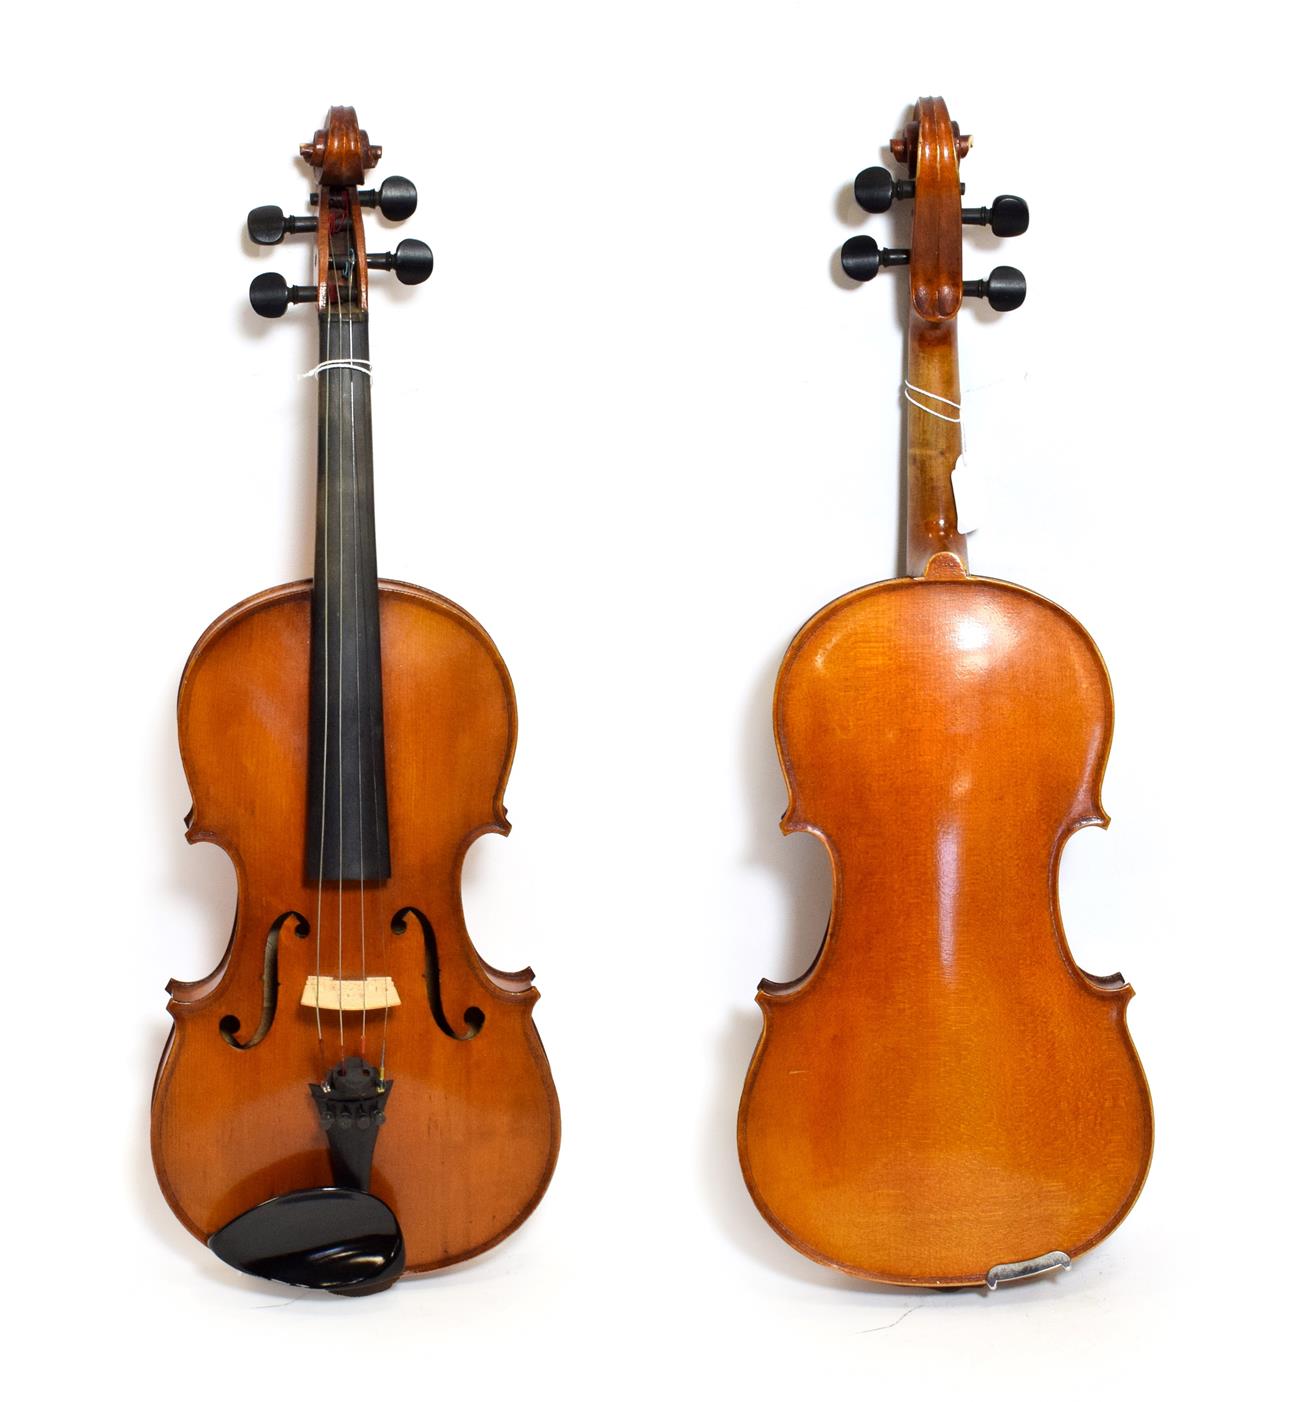 Lot 3005 - Violin 14 1/8'' one piece back, labelled 'Phebes', cased with bow